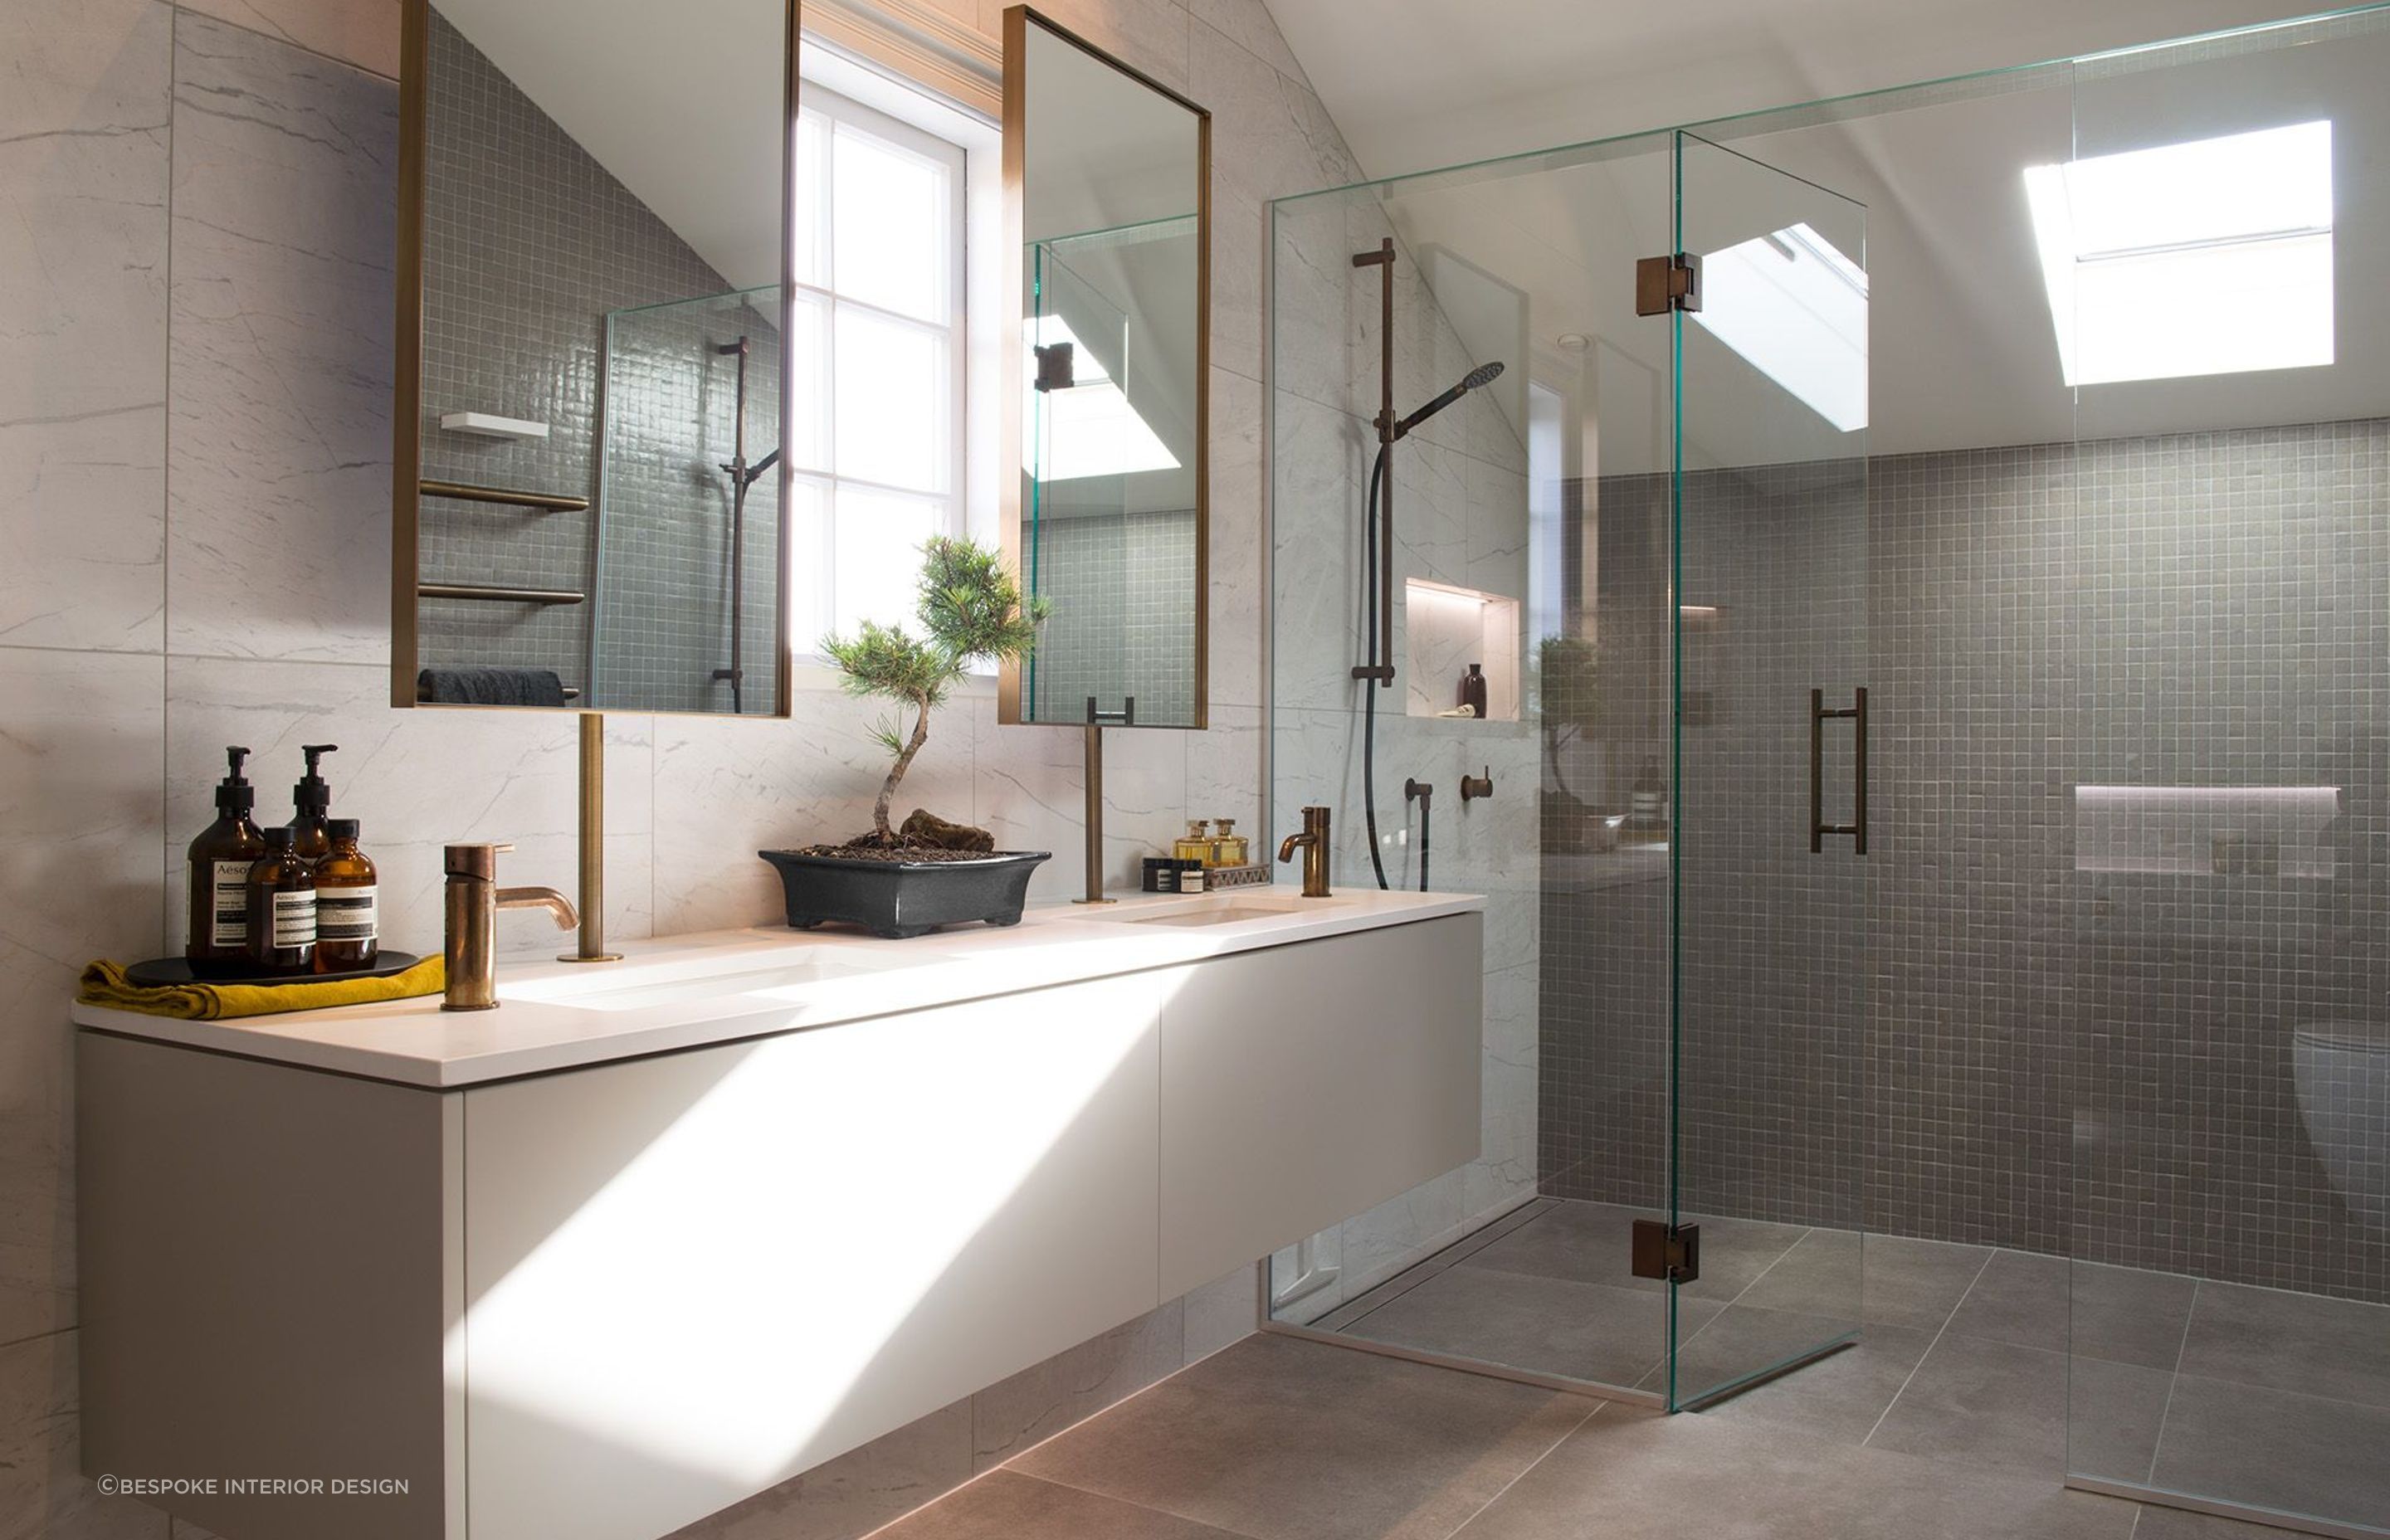 The beautiful bathroom renovation of Rangitoto House featuring vanity-mounted mirrors.